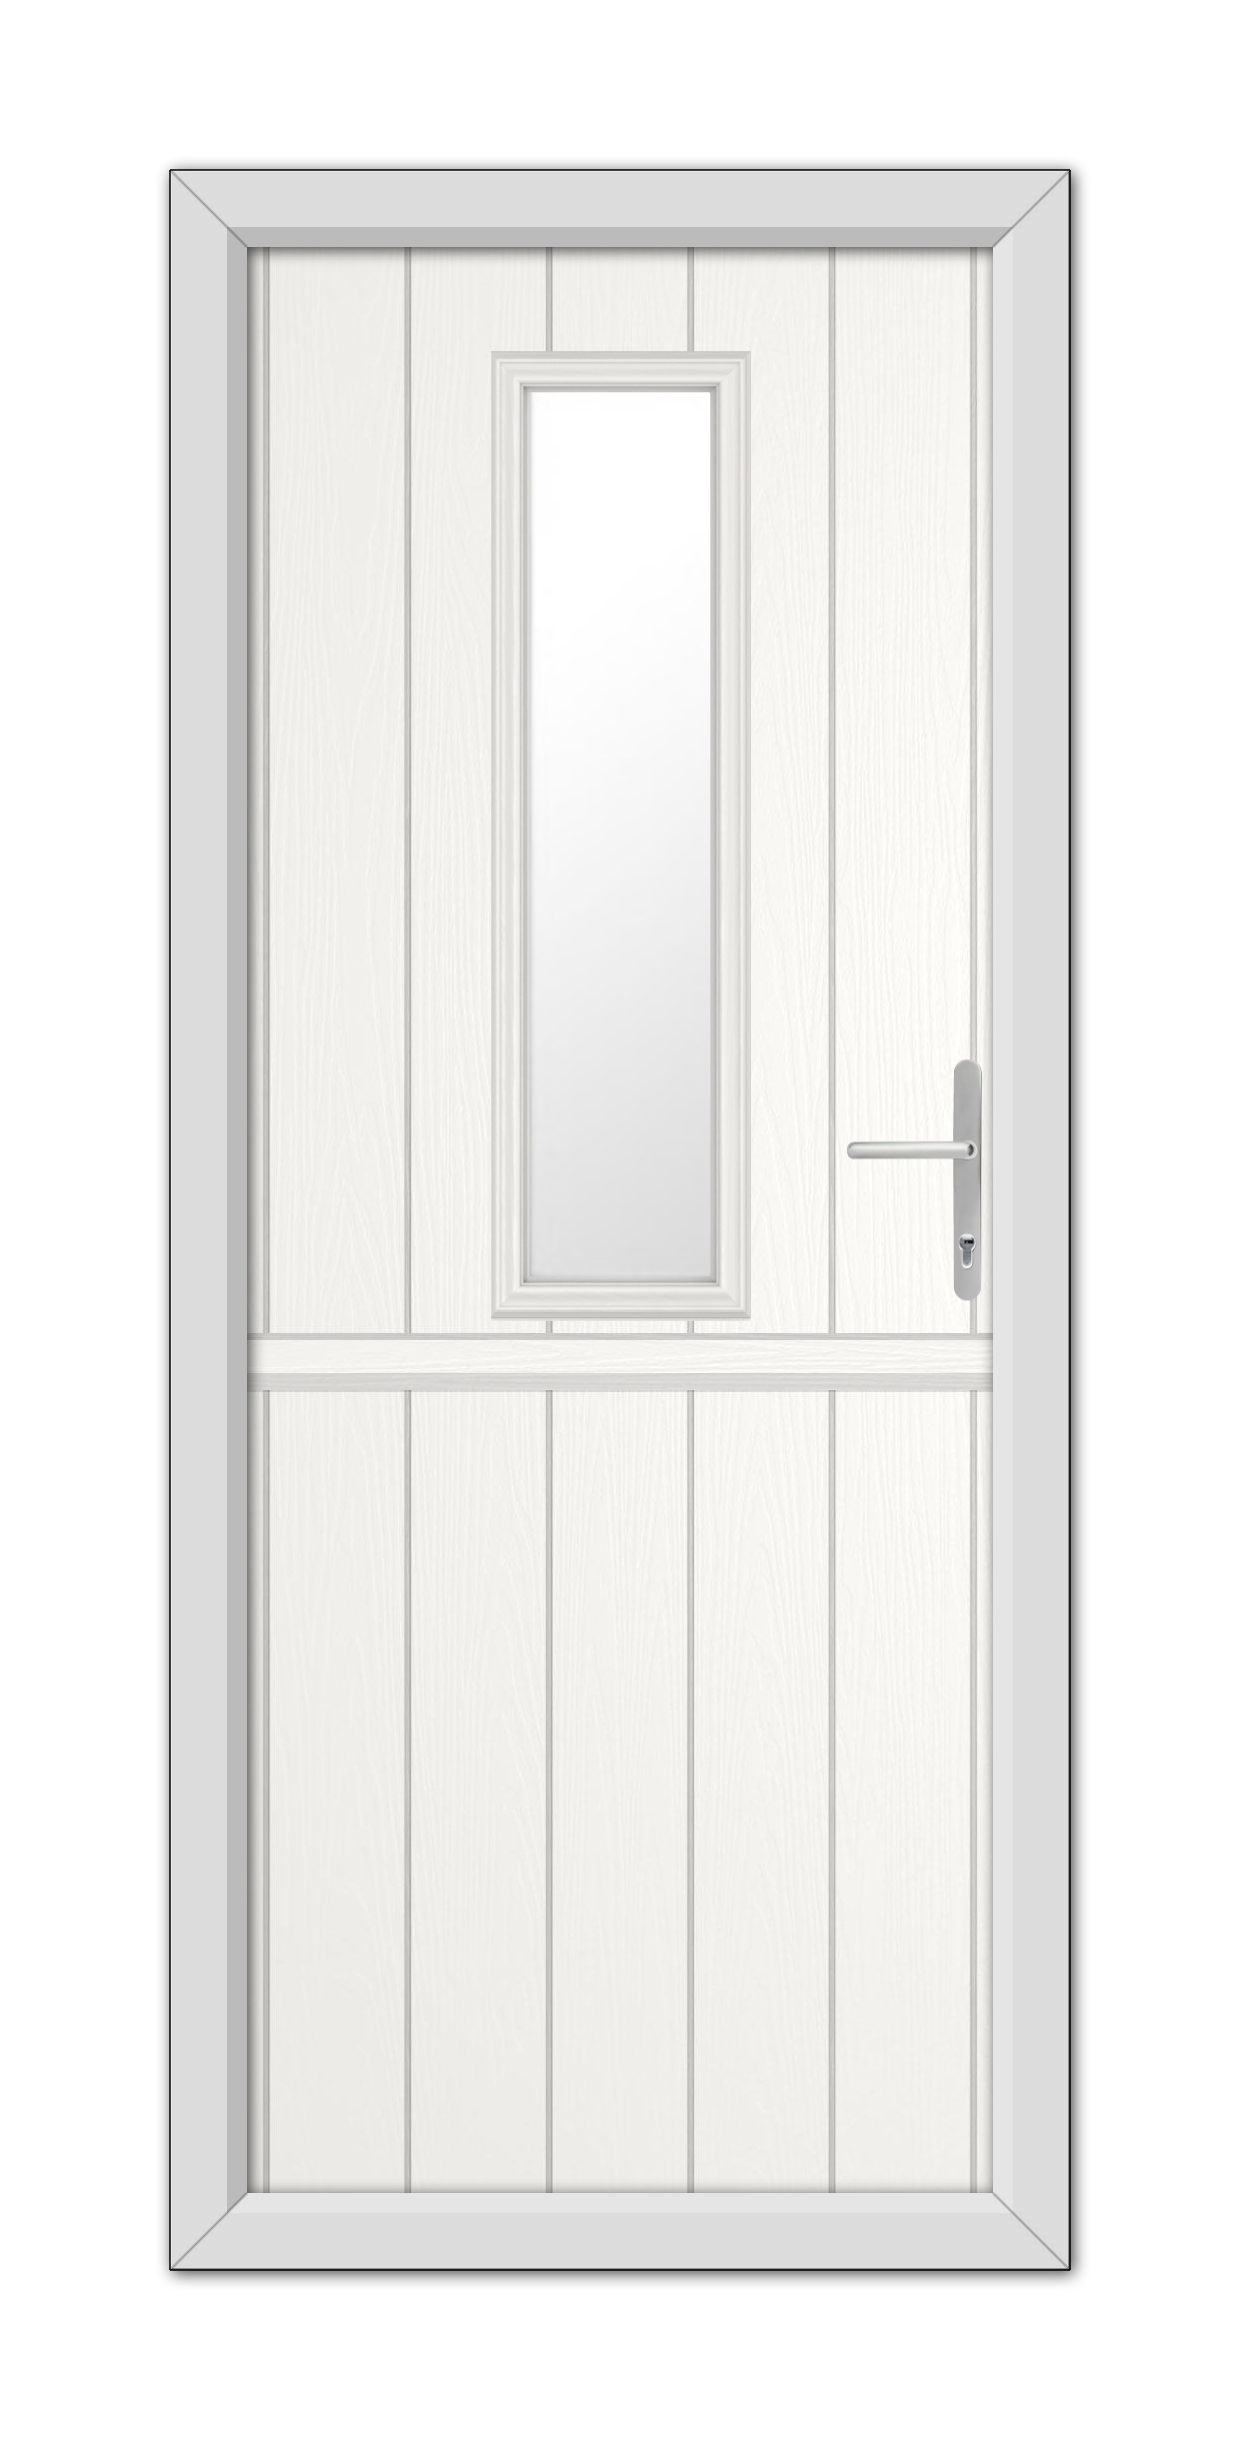 A modern White Mowbray Stable Composite Door 48mm Timber Core with a vertical handle, rectangular window at the top, and panel details, set within a simple frame.